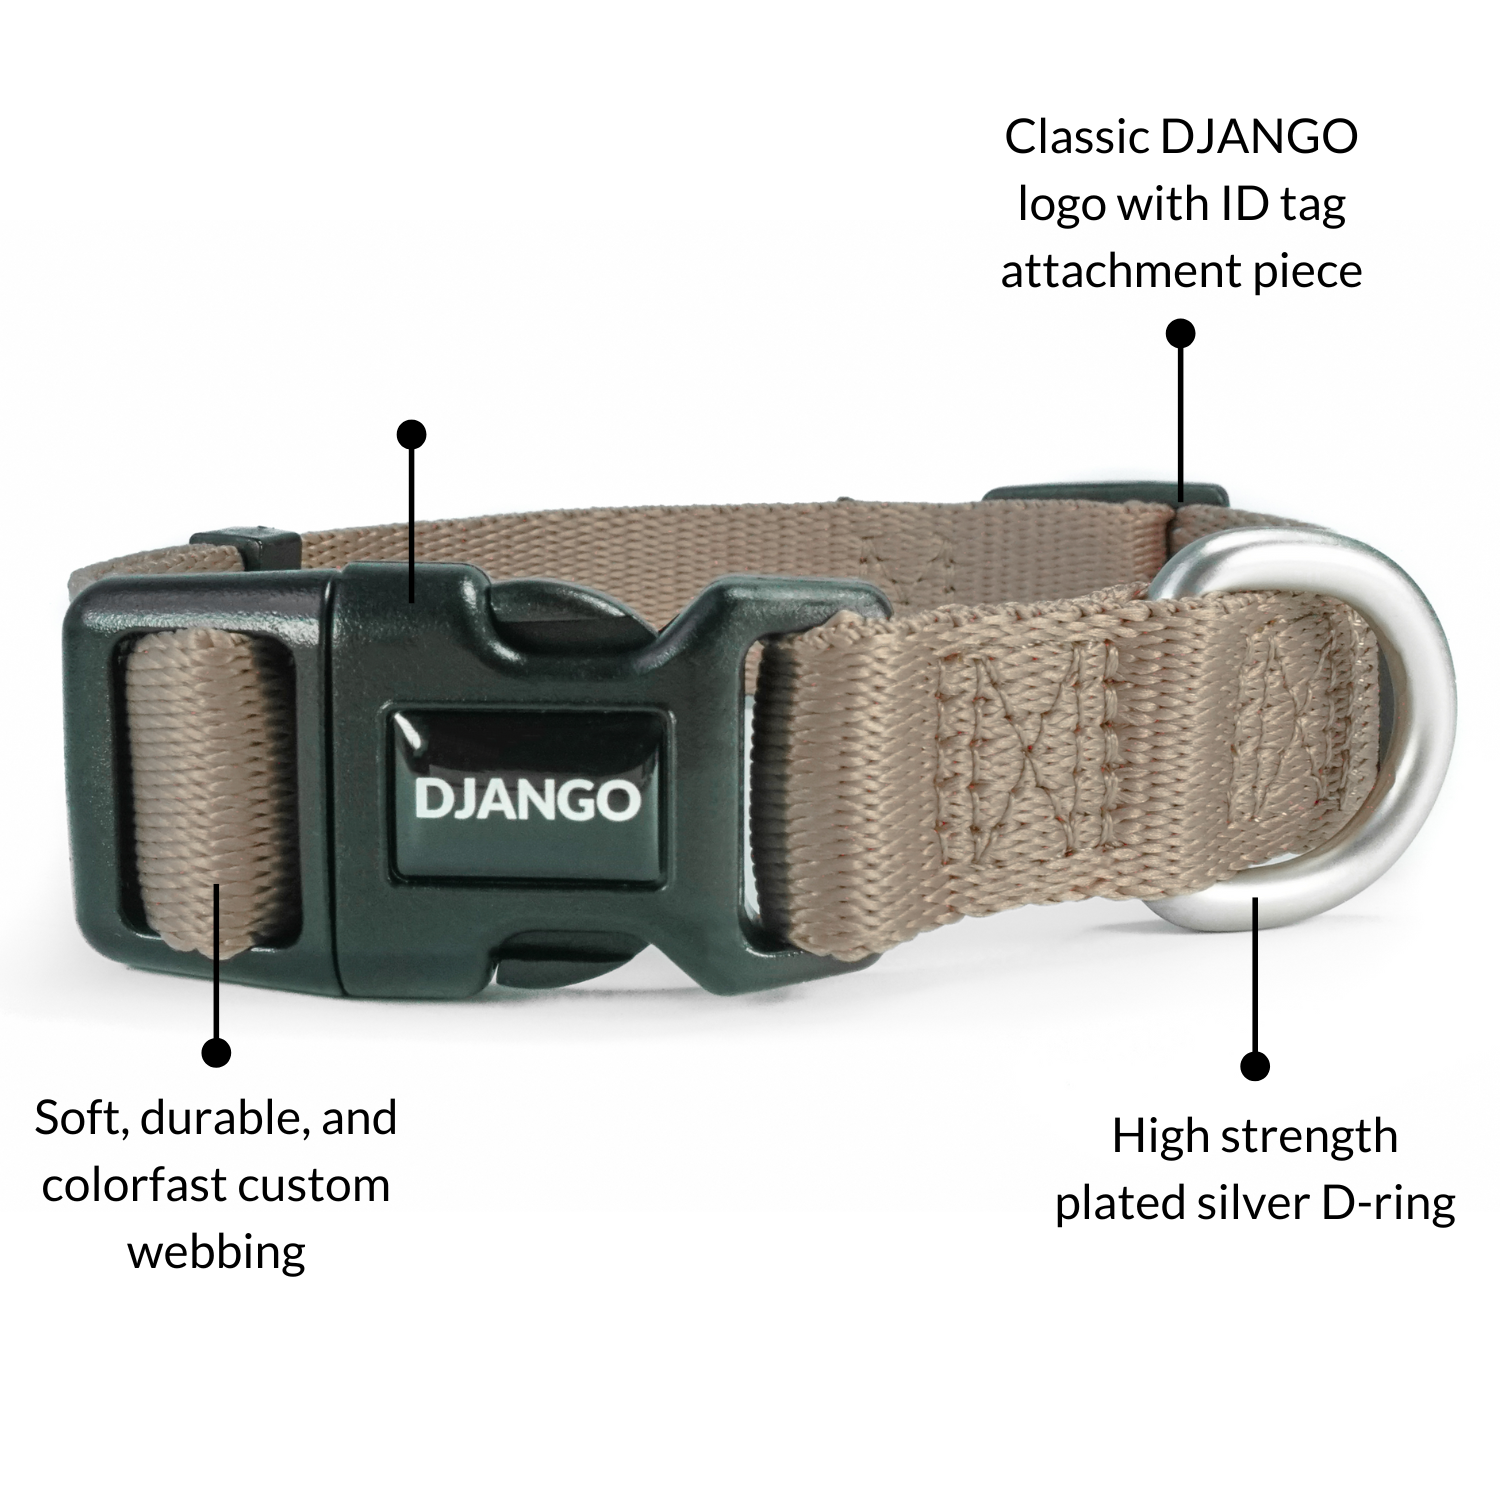 DJANGO Tahoe Dog Collar in Sandy Beige - Key features include soft and durable custom webbing, a heavy duty plated silver D-ring, a secure and easy on-off side release buckle, and DJANGO's classic logo. - djangobrand.com